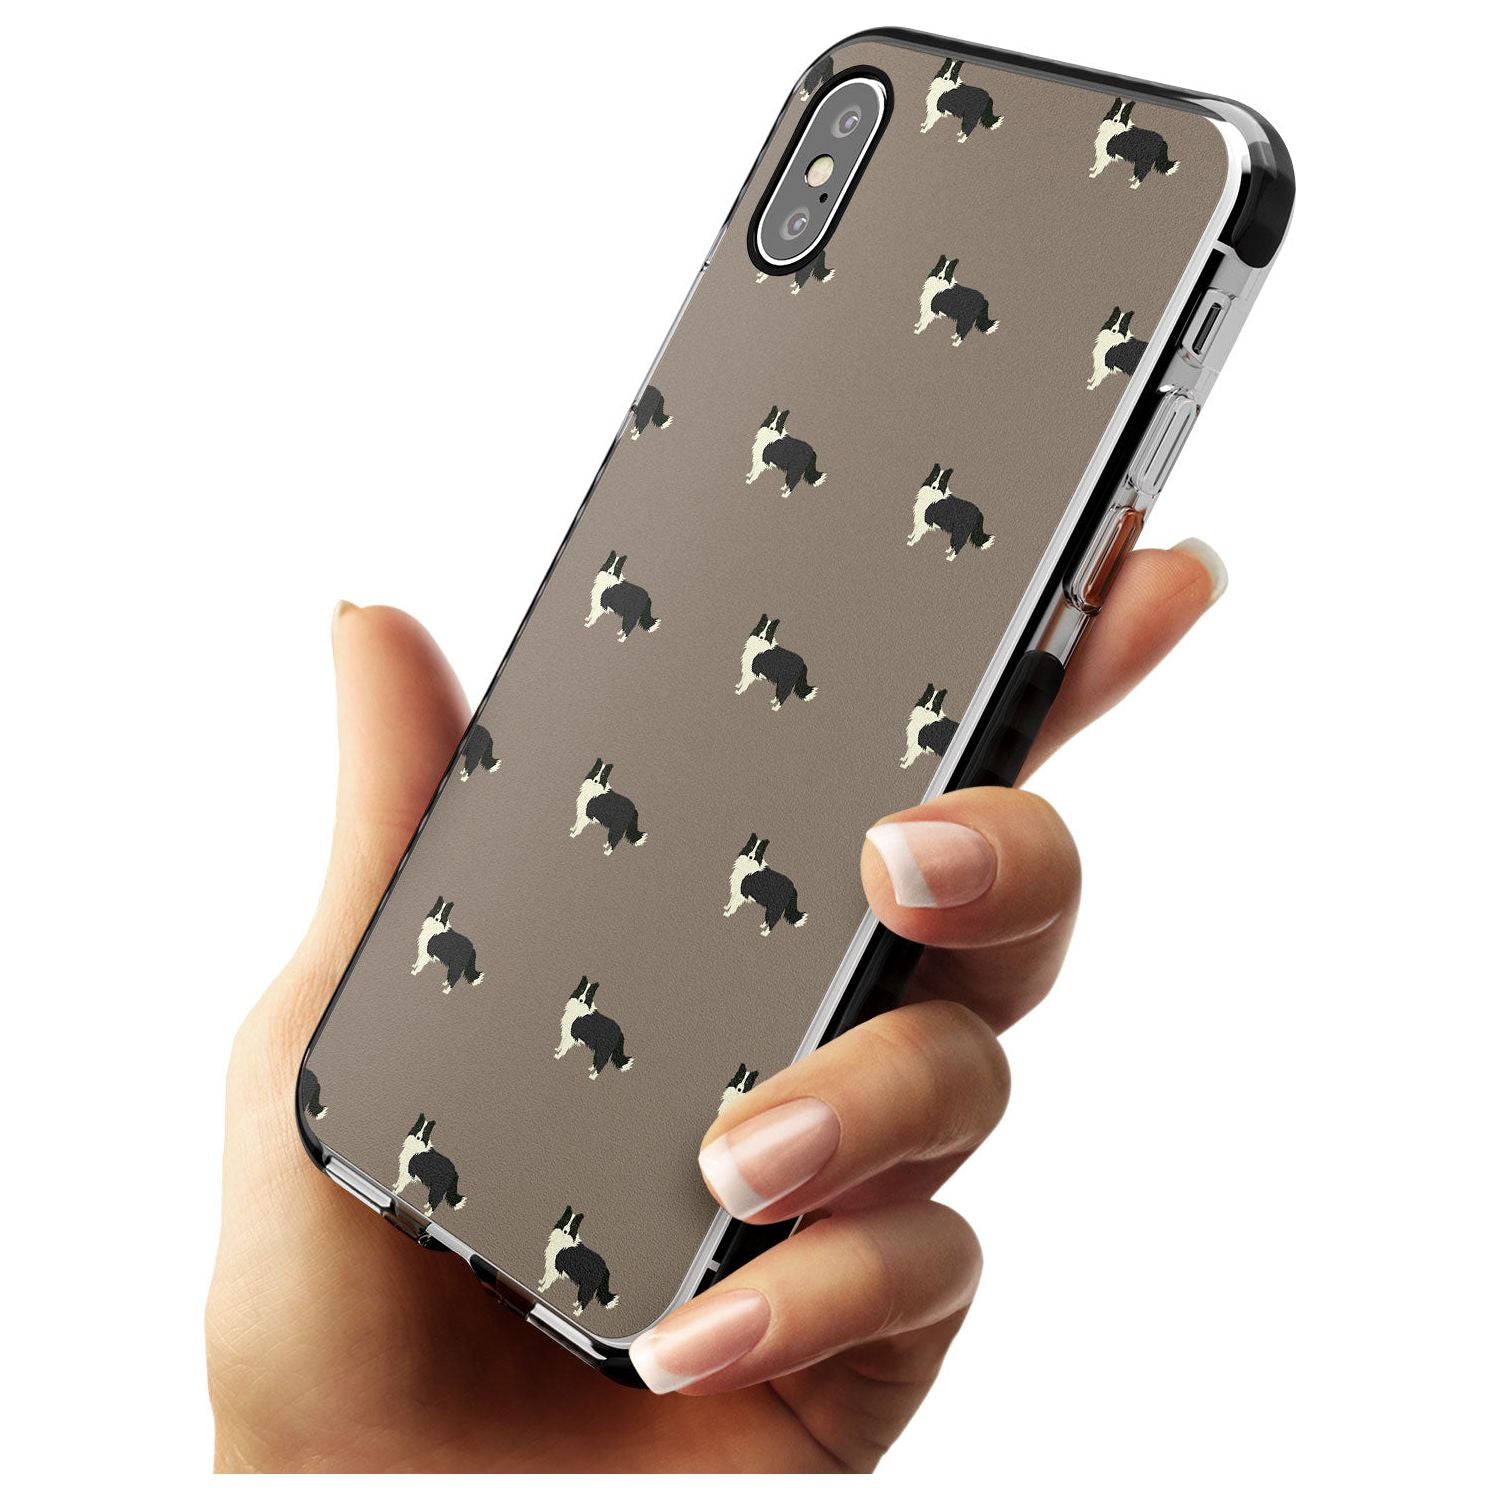 Border Collie Dog Pattern Black Impact Phone Case for iPhone X XS Max XR